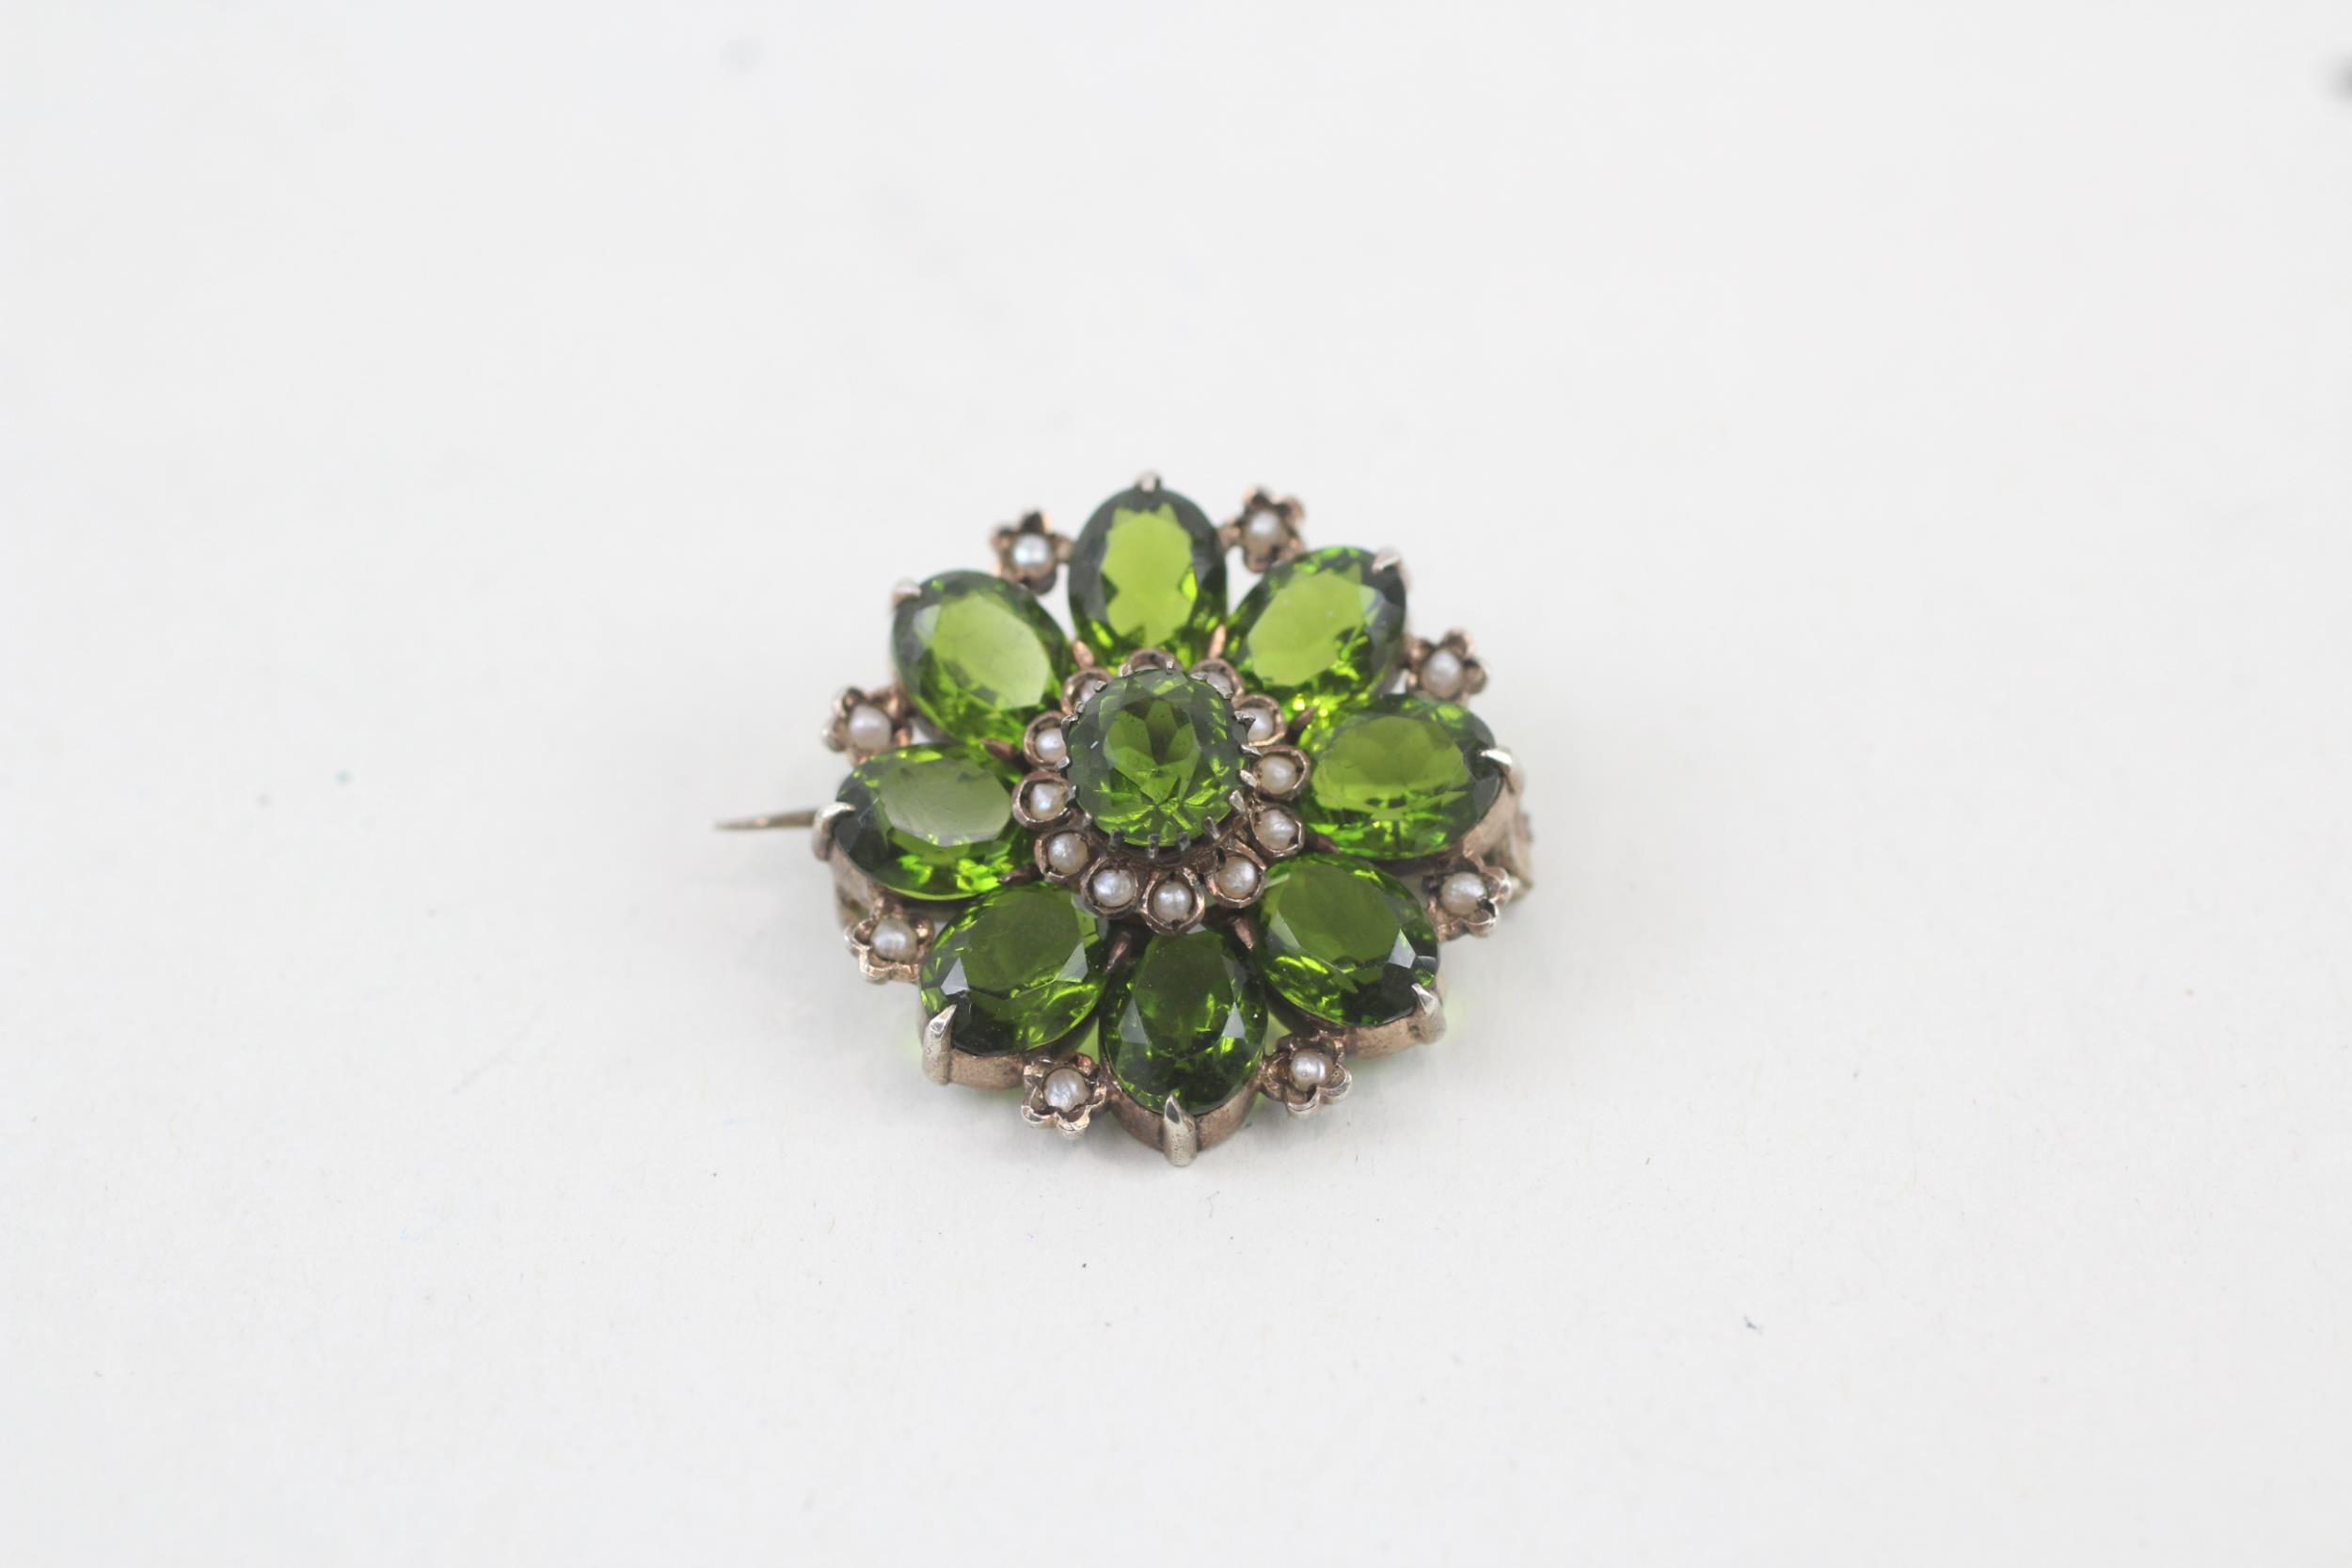 Silver antique gemstone and seed pearl floral brooch (6g) - Image 7 of 9